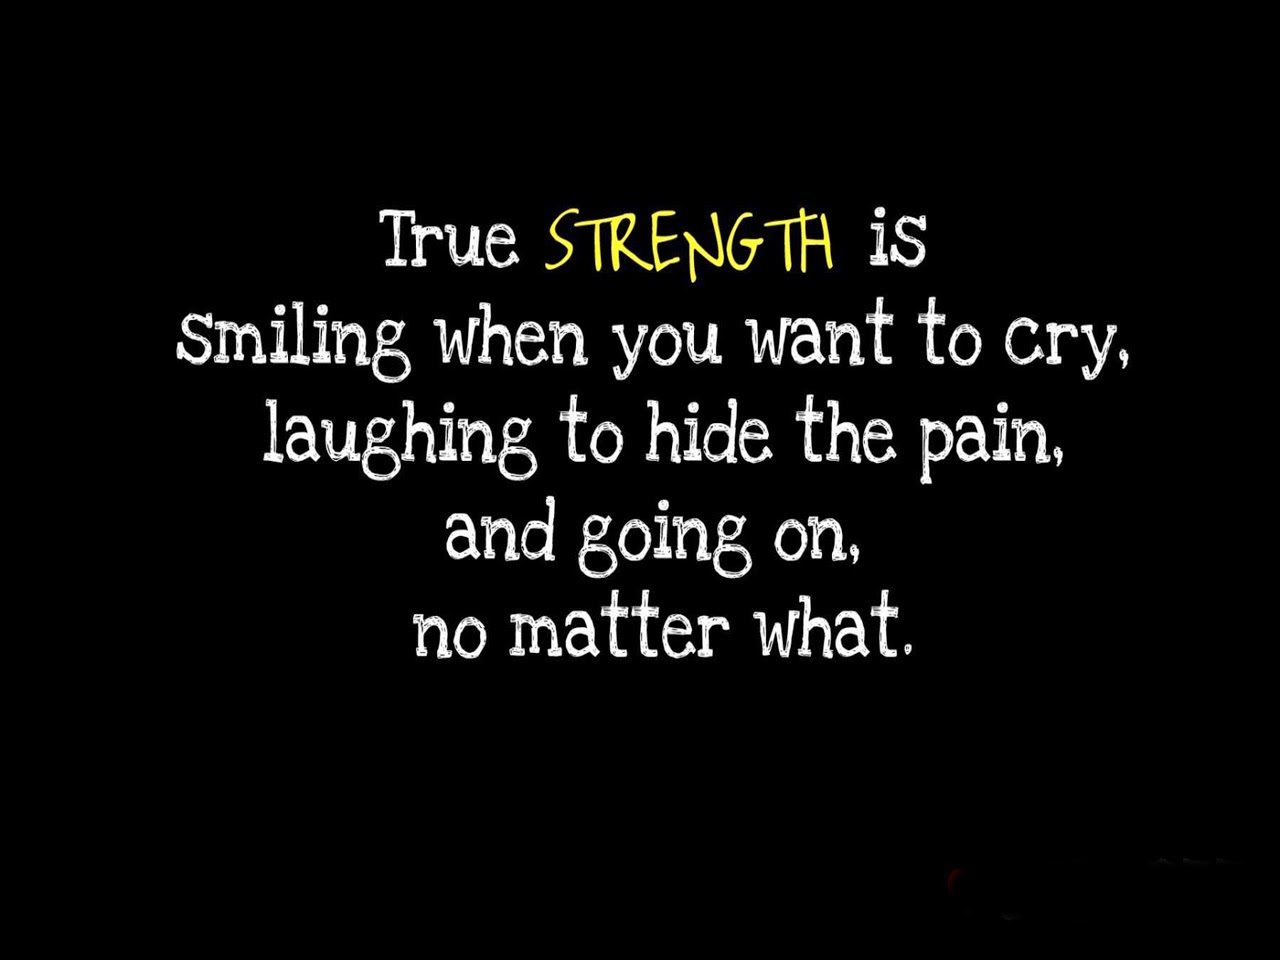 Strenght quotes True strenght is smiling